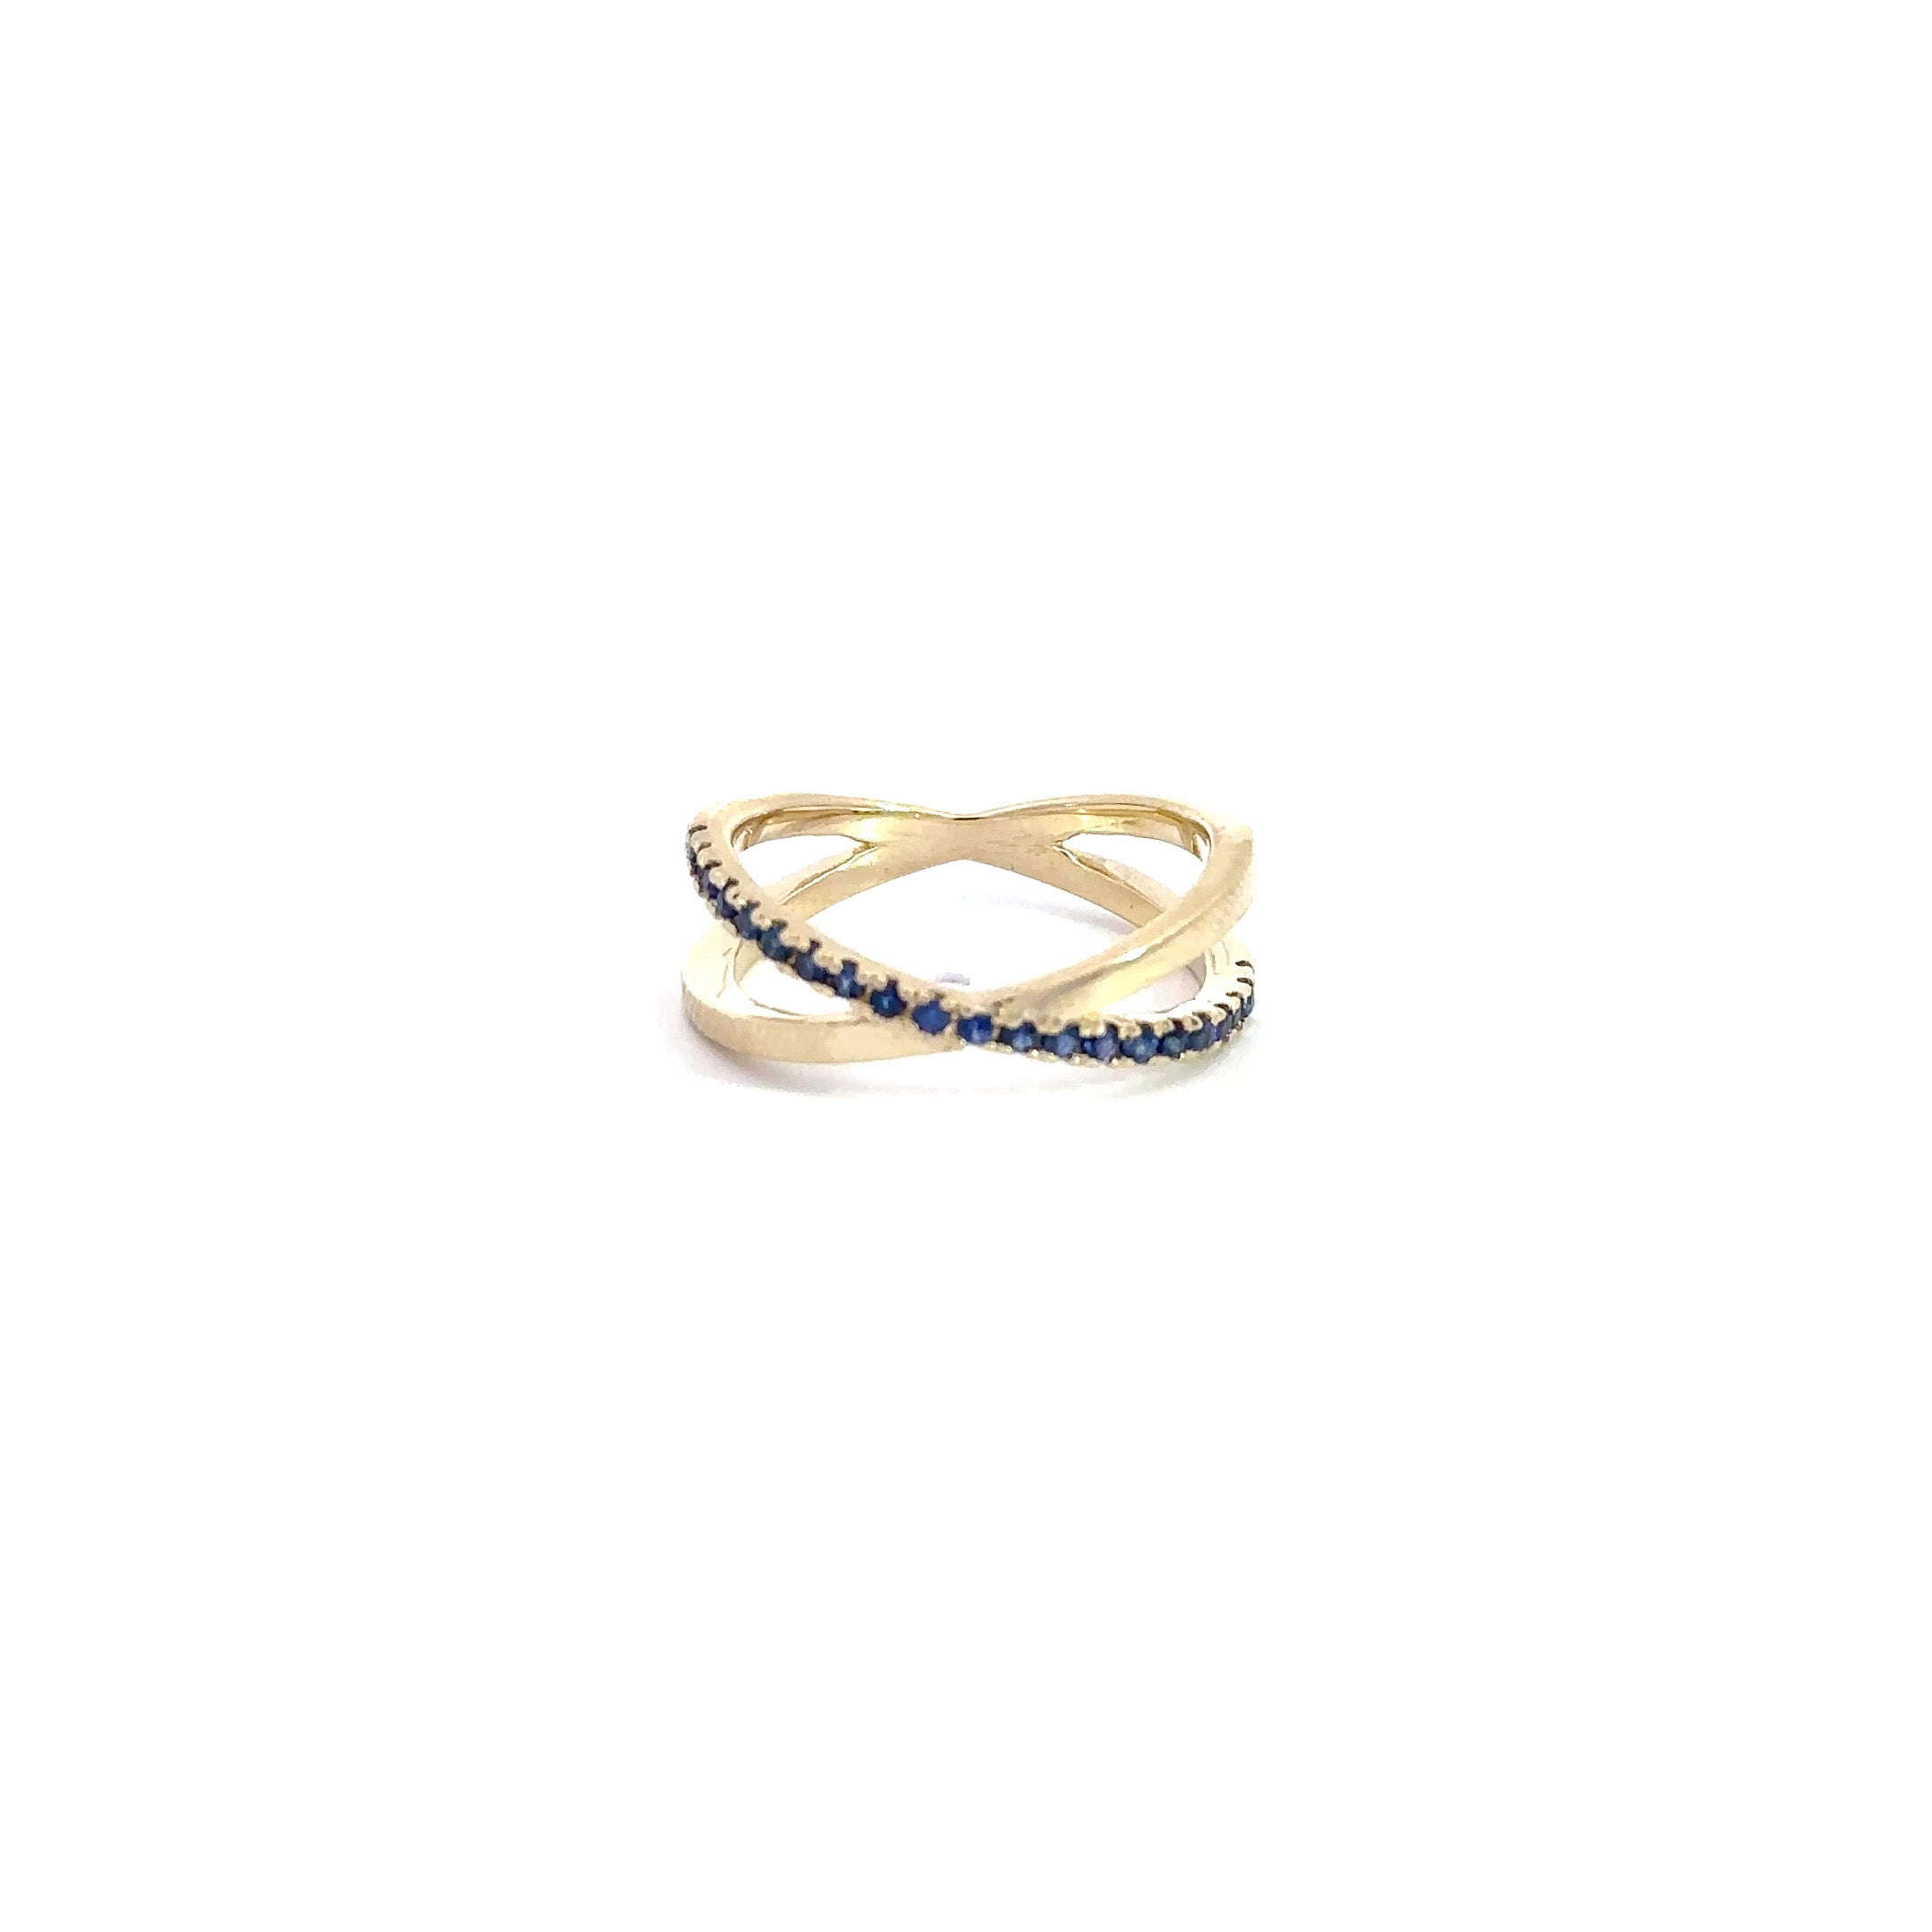 WD1198 14KT GOLD BLUE SAPPHIRE KISS RING